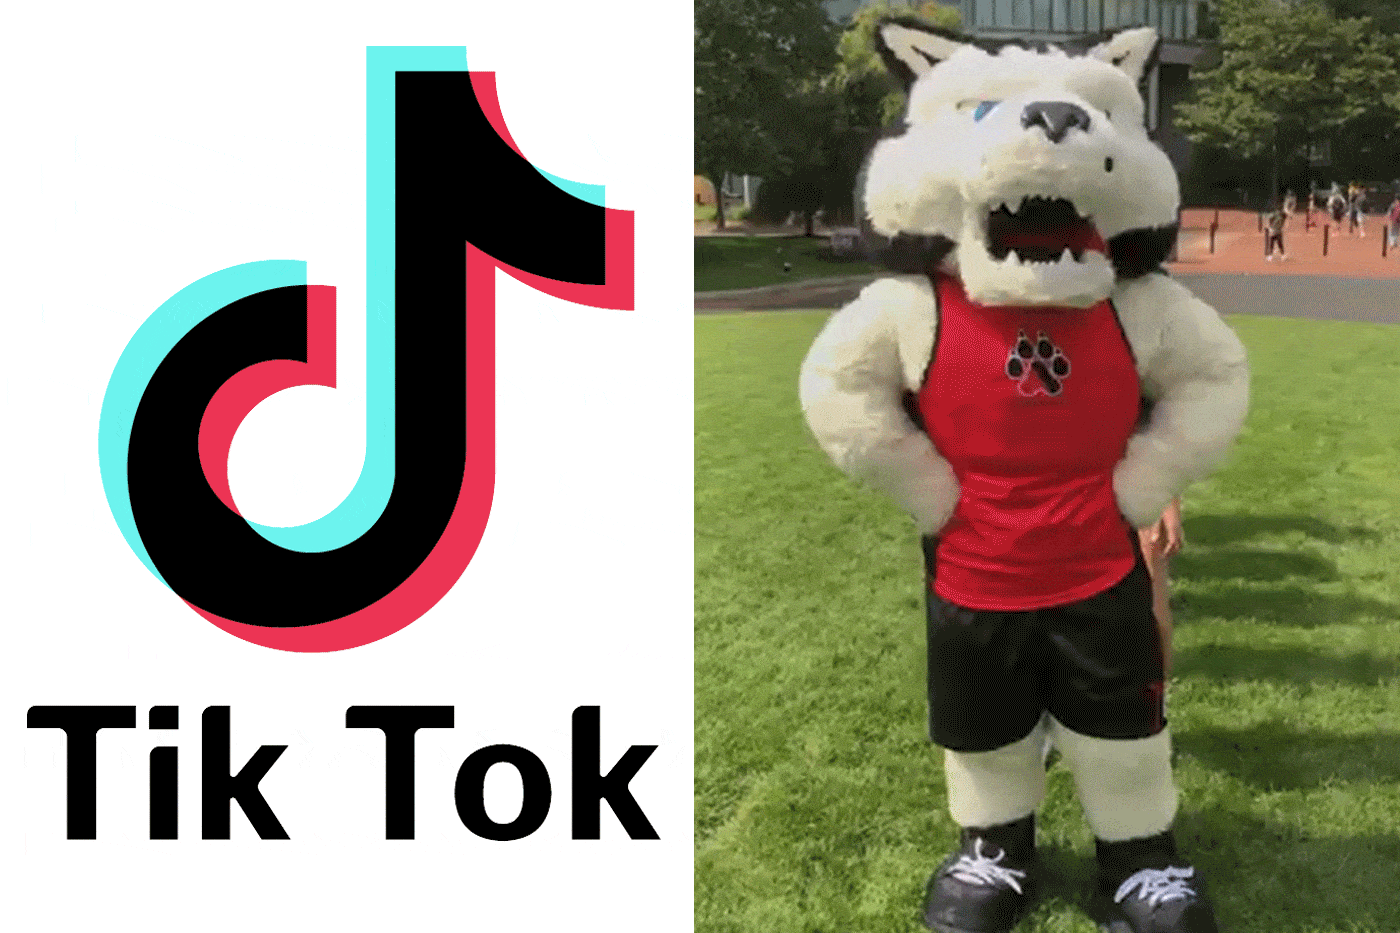 Get a slice of campus life 15 seconds at a time by following Northeastern on TikTok. Credit: @northeasternu on TikTok